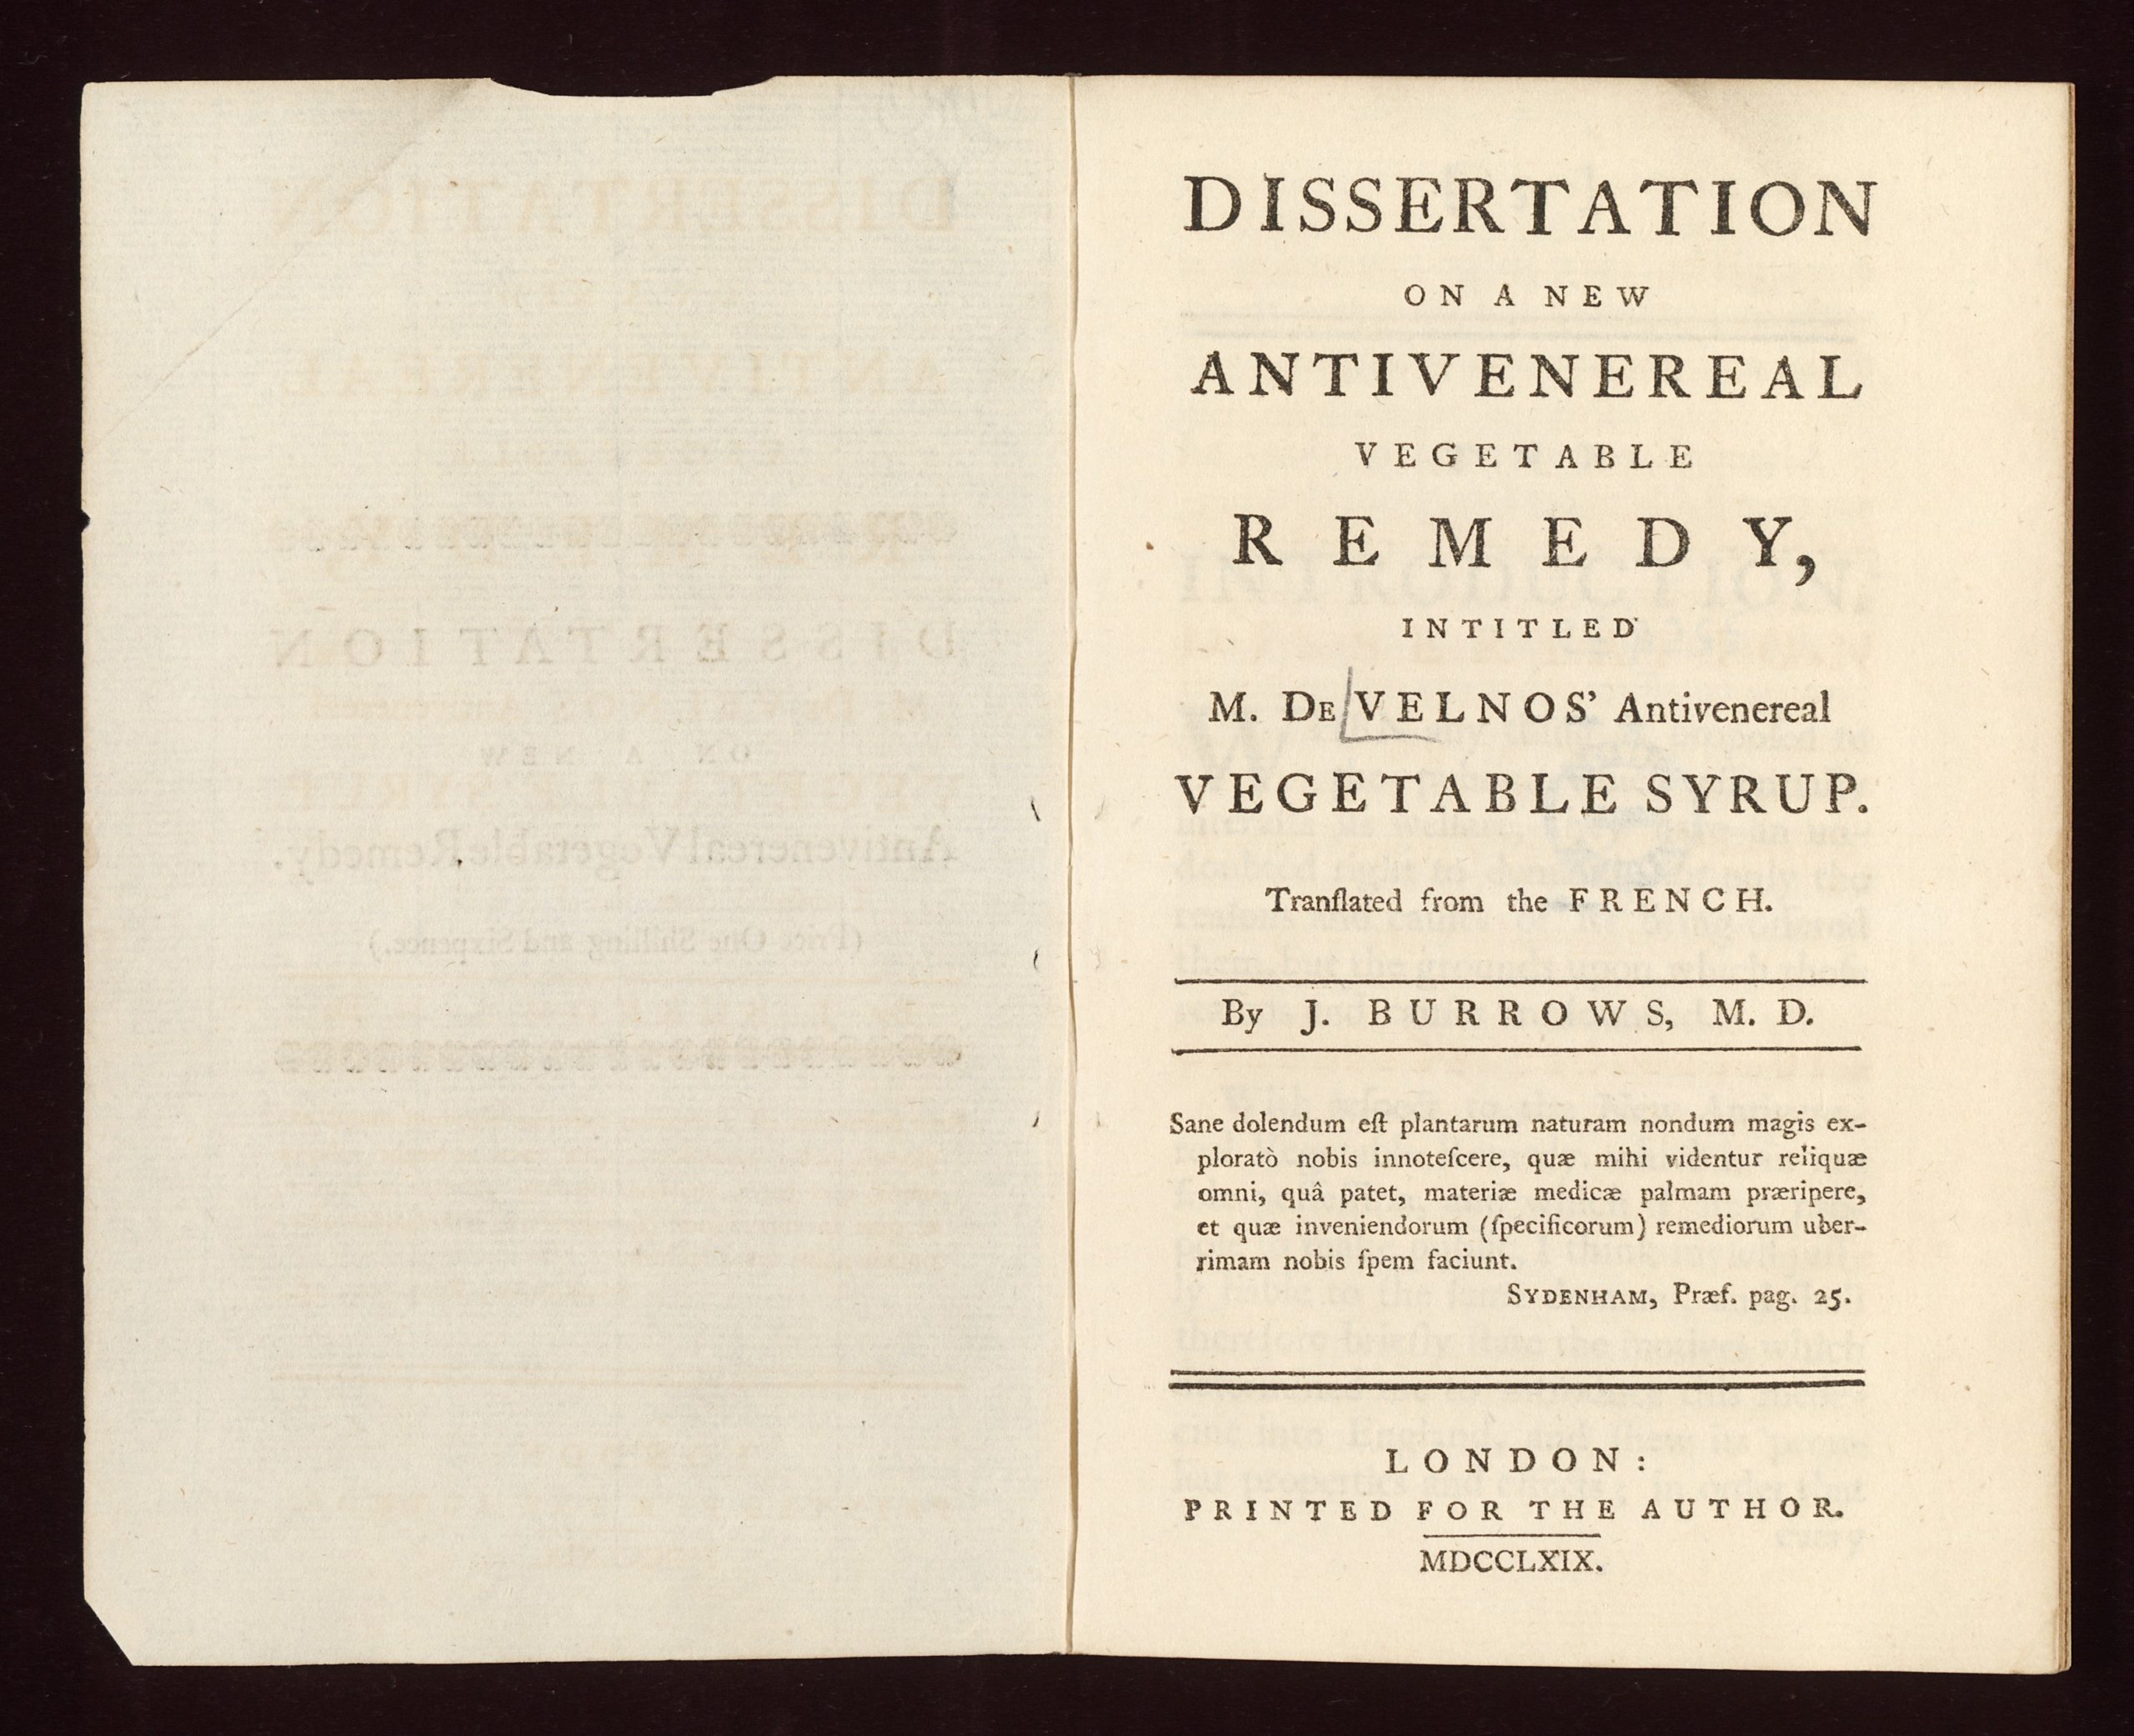 Dissertation on a new antivenereal vegetable remedy